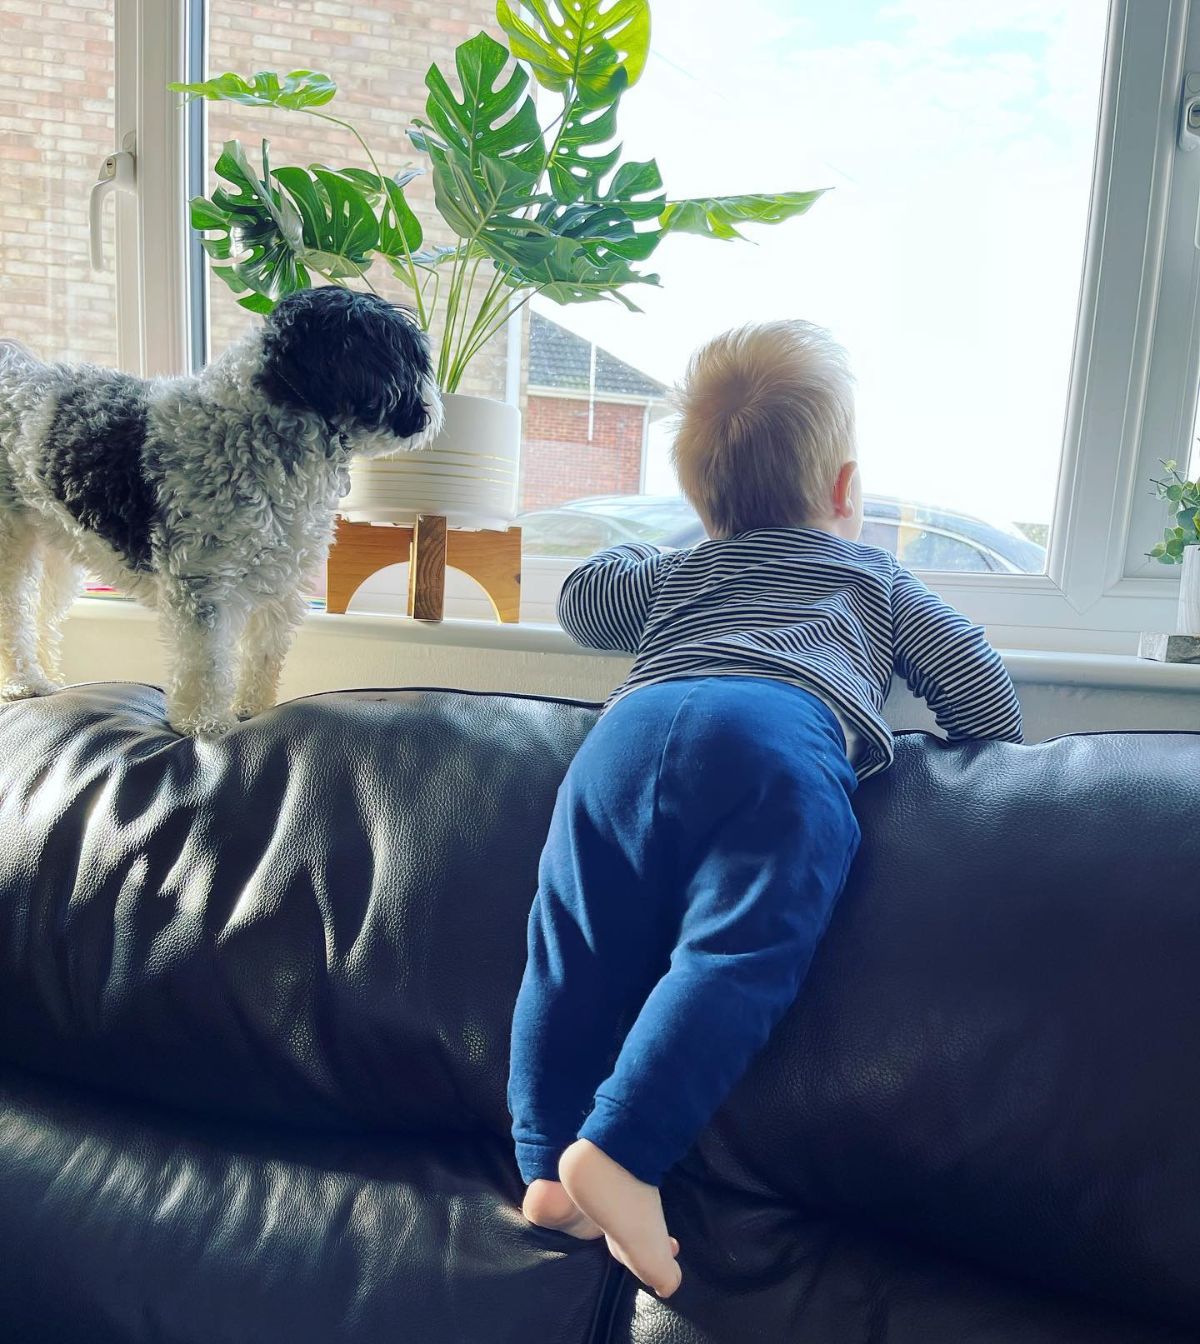 small fluffy black and white dog peeking out a window next to a toddler on a black sofa